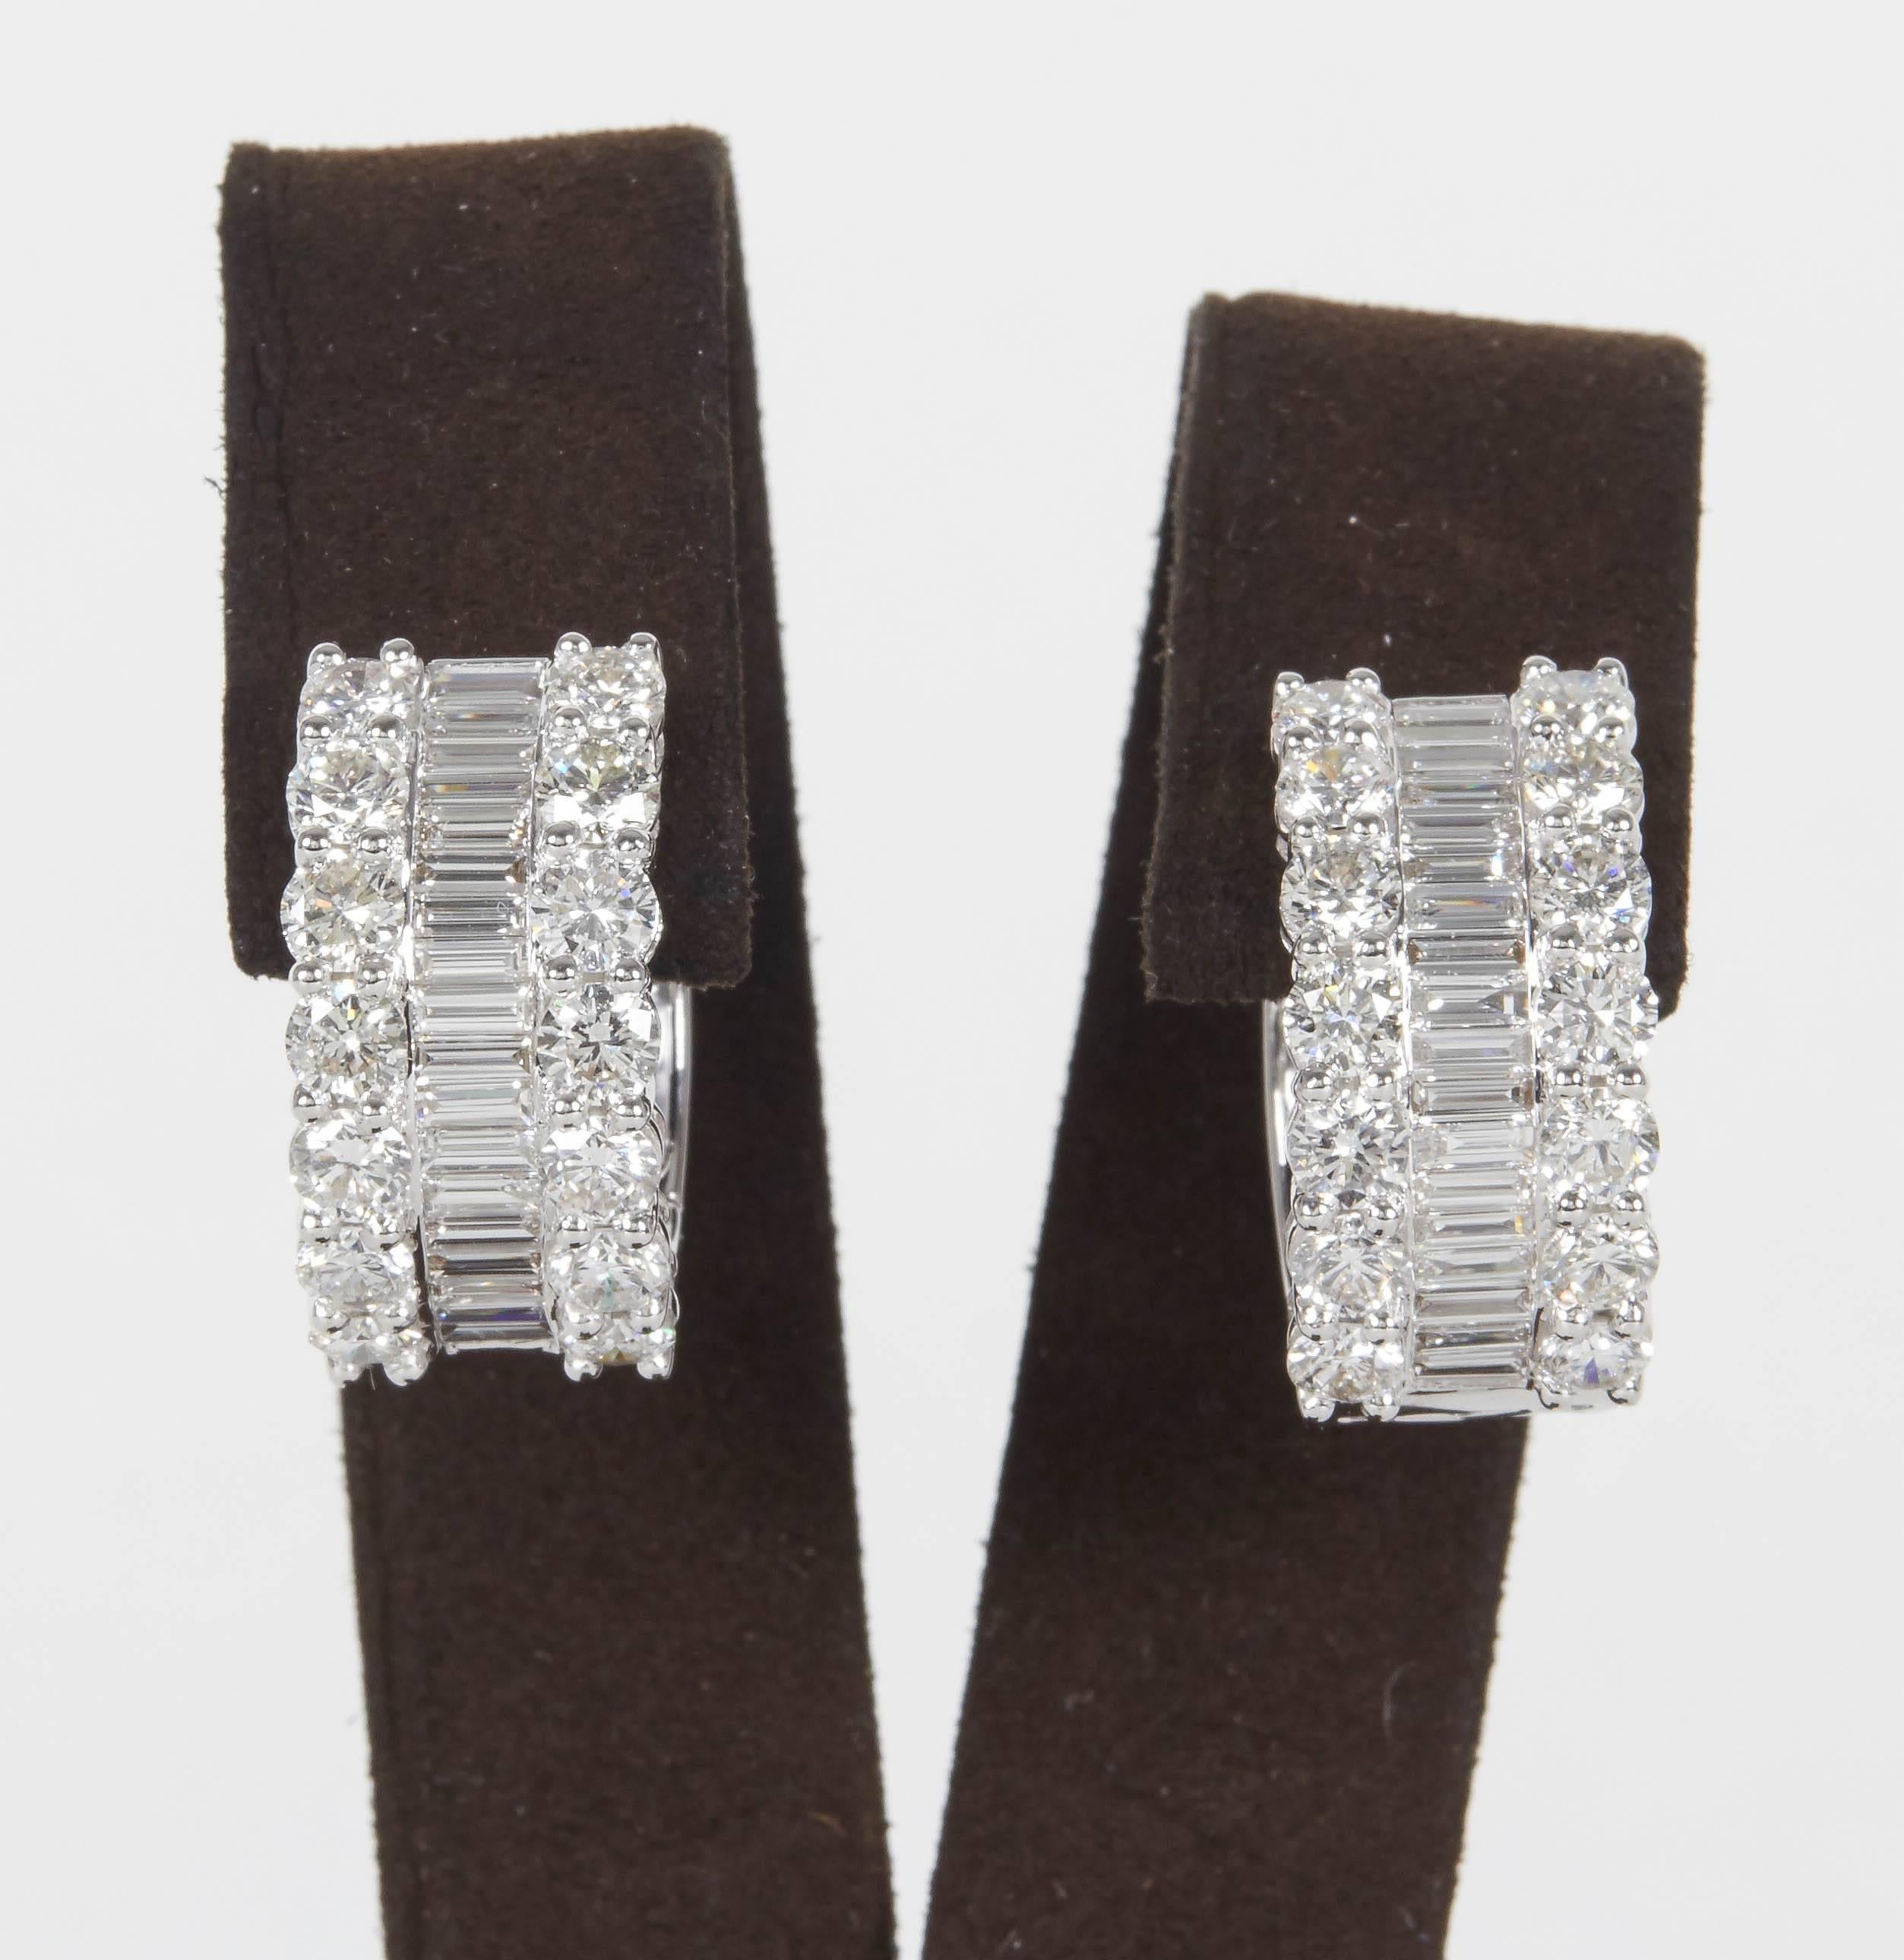 

A stunning design this earring is full of sparkle and fire.

6.36 carats of F color VS clarity diamonds set in 18k white gold. 

Approximately .41 inches wide and .85 inches long